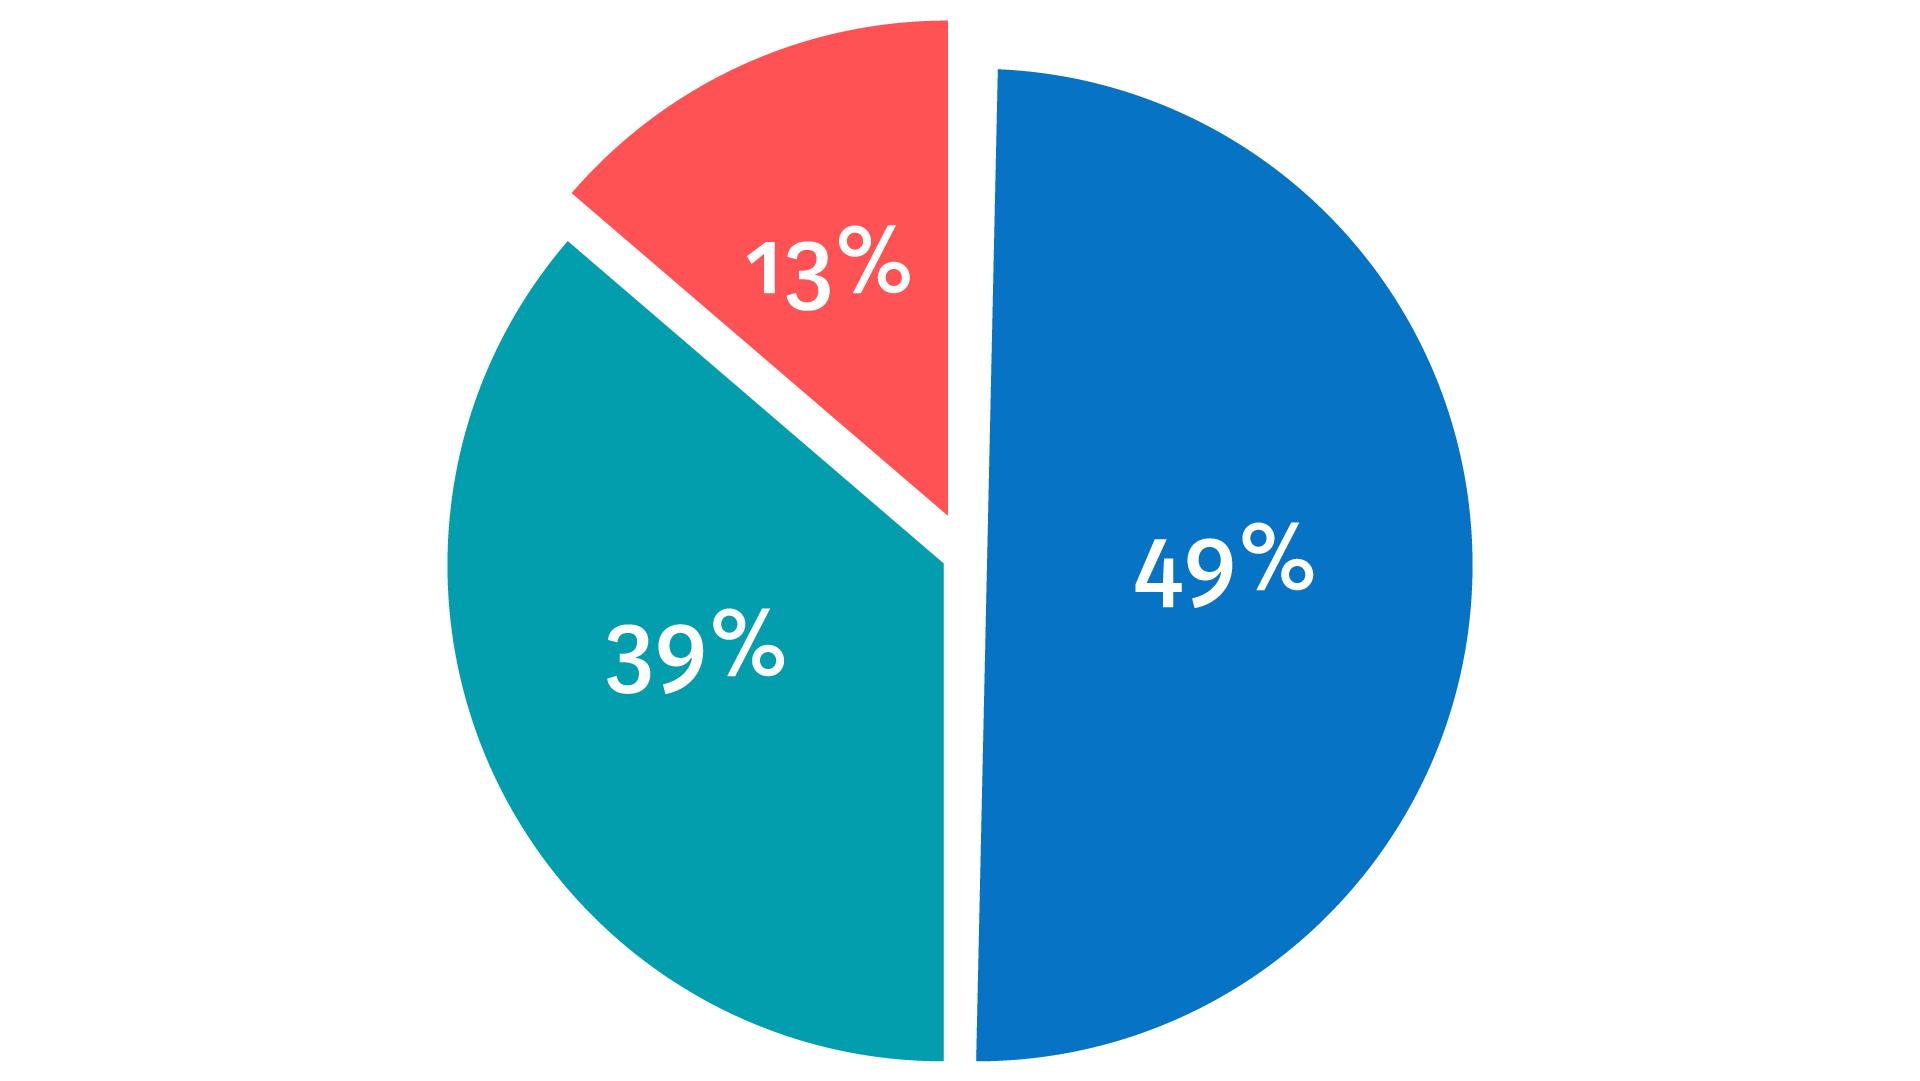 A pie chart divived into three sections: 49 %, 39 % and 13 %. 